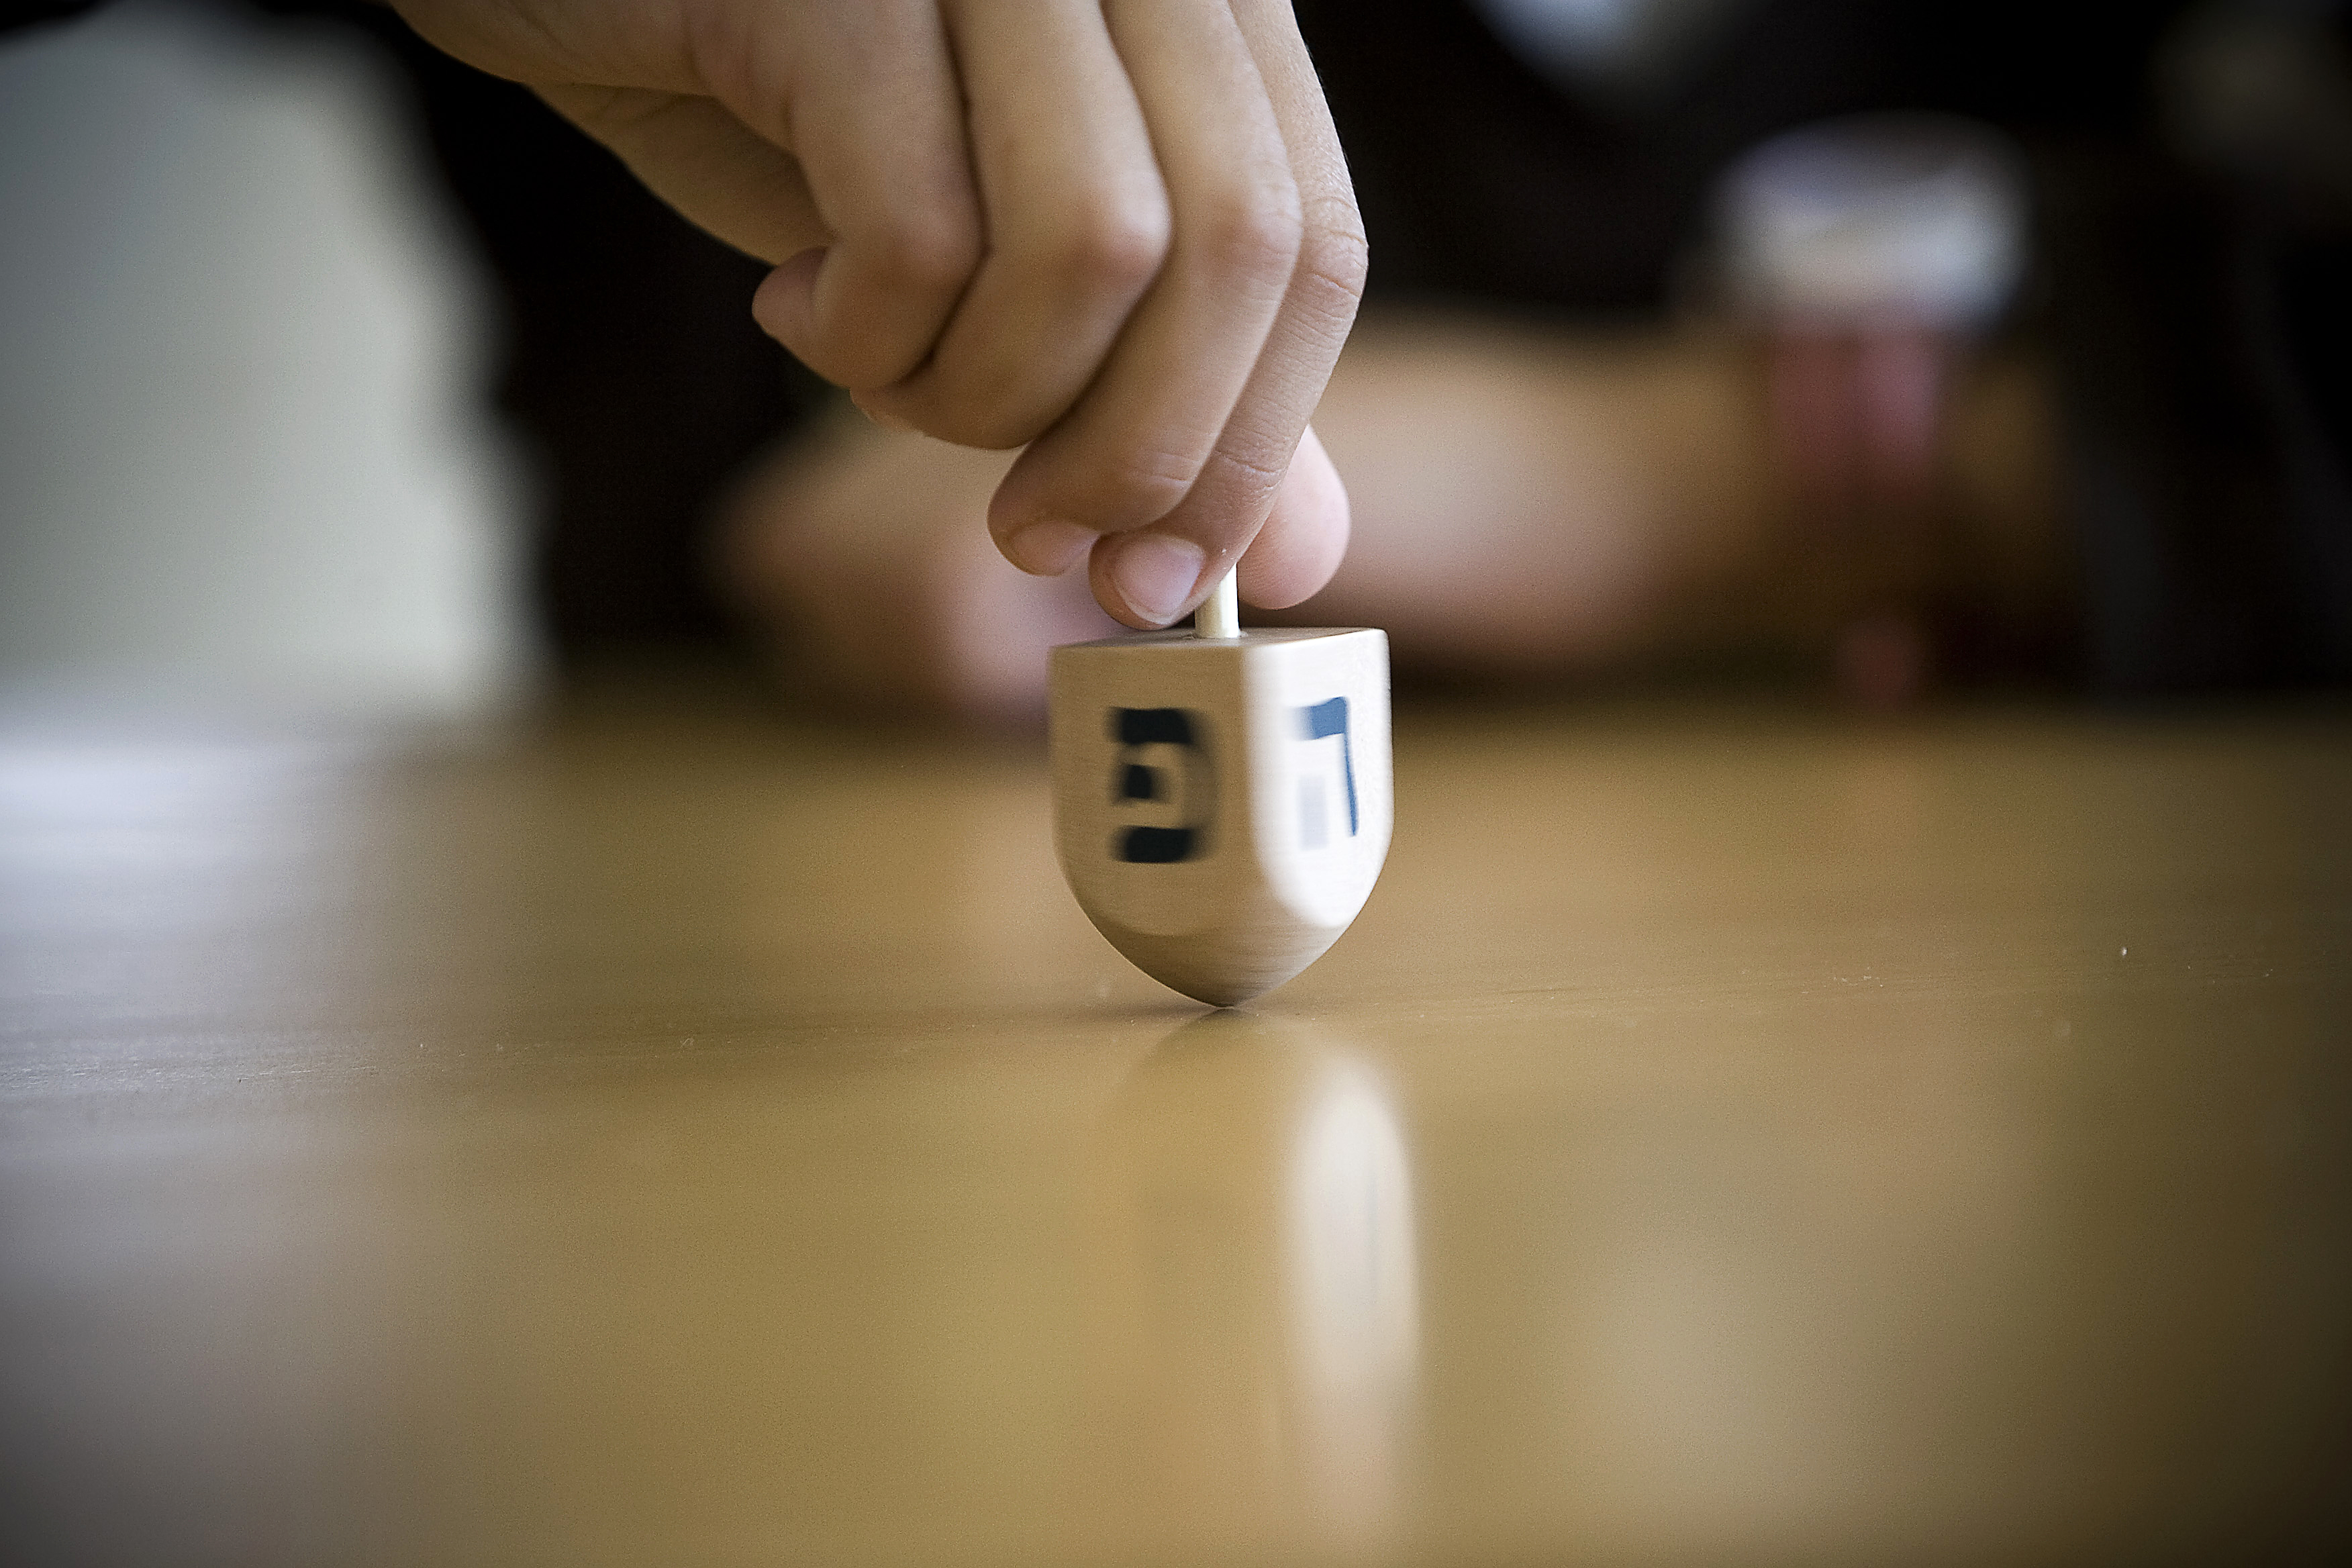 Up your Hanukkah game with this new spin on dreidel